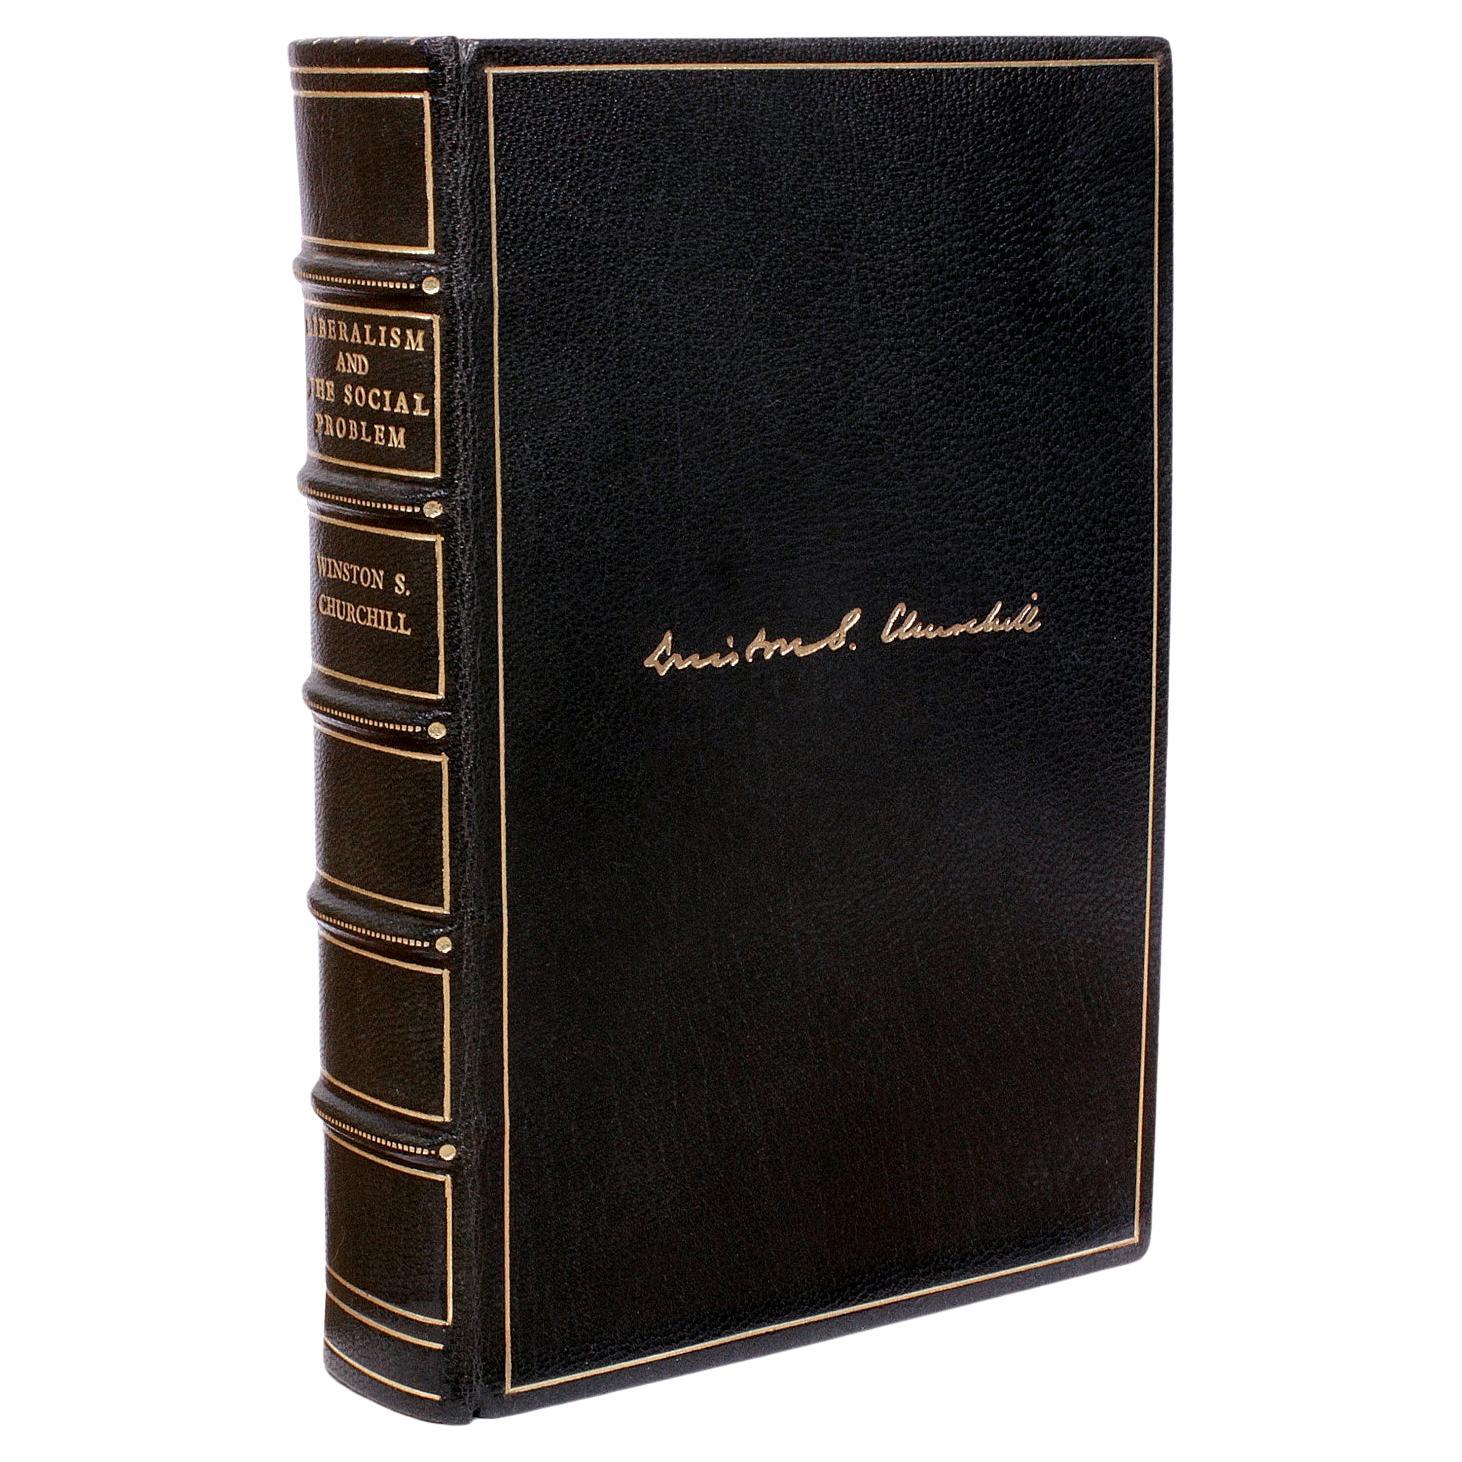 Winston CHURCHILL. Liberalism And The Social Problem - FIRST EDITION - 1909